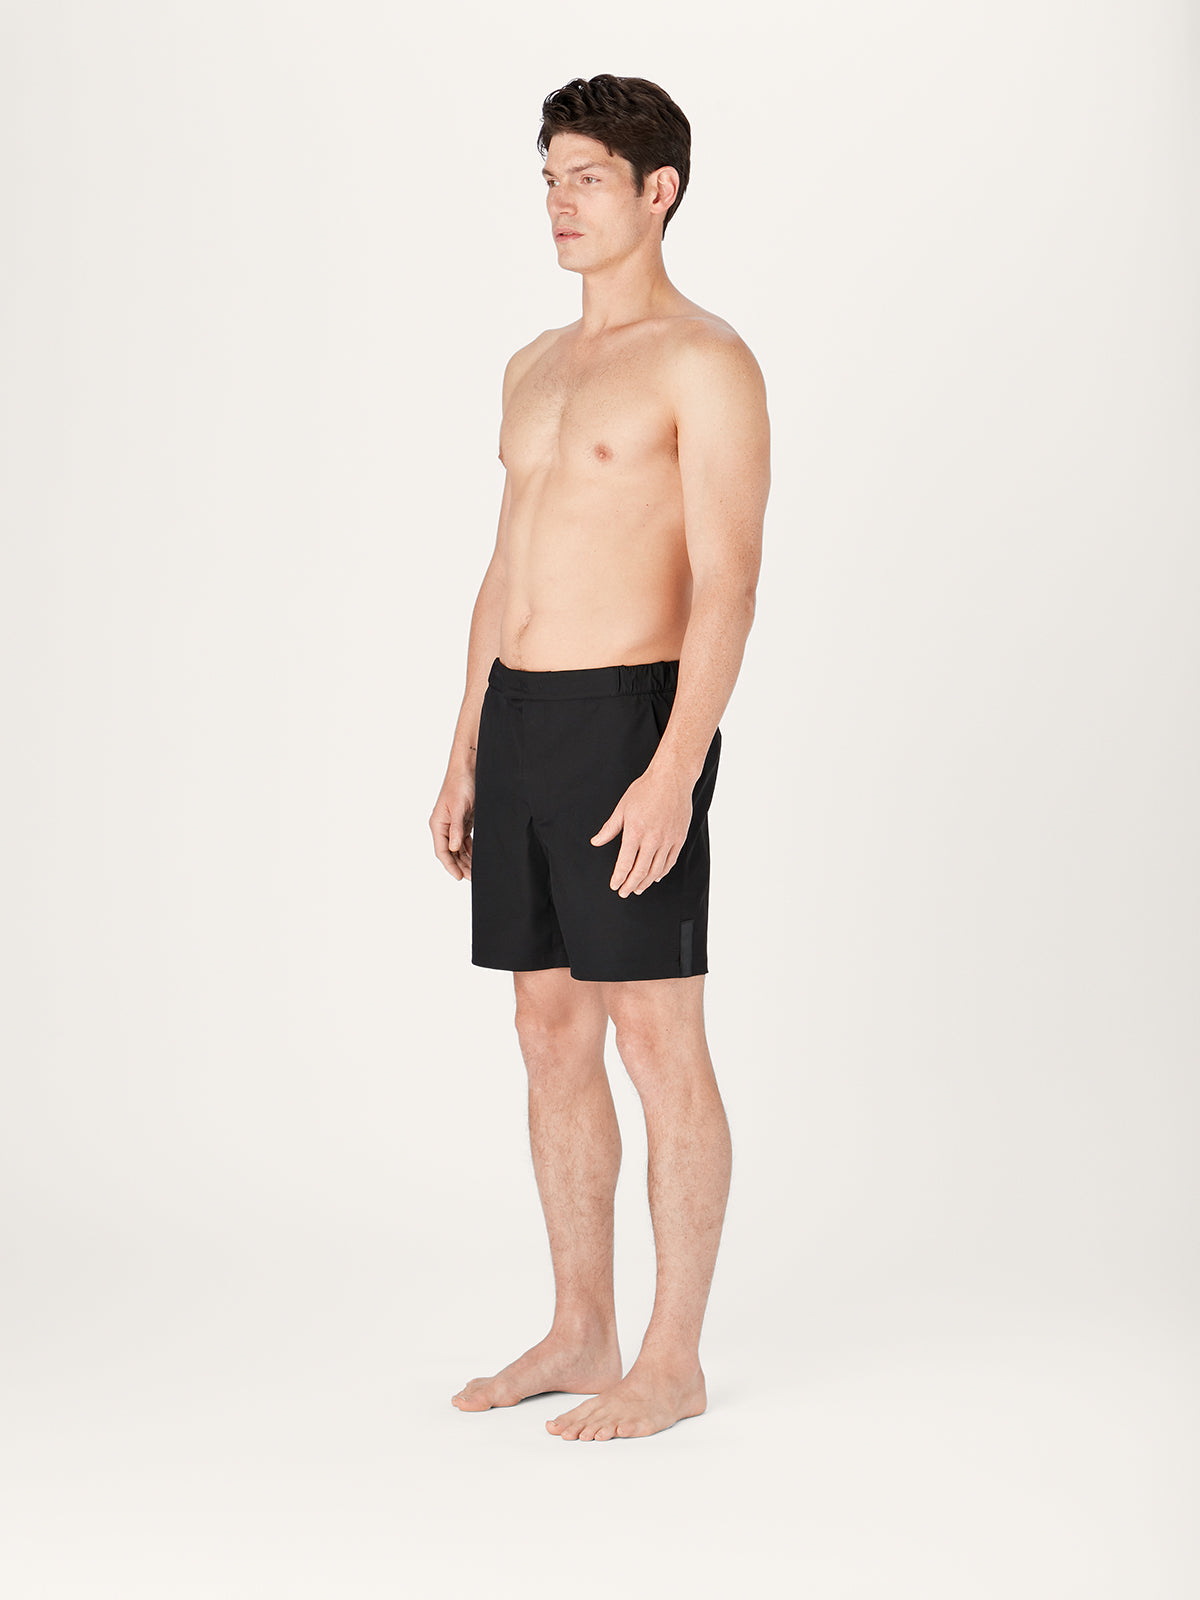 The Anywear Short 2.0 || Black | Recycled nylon with netting ...